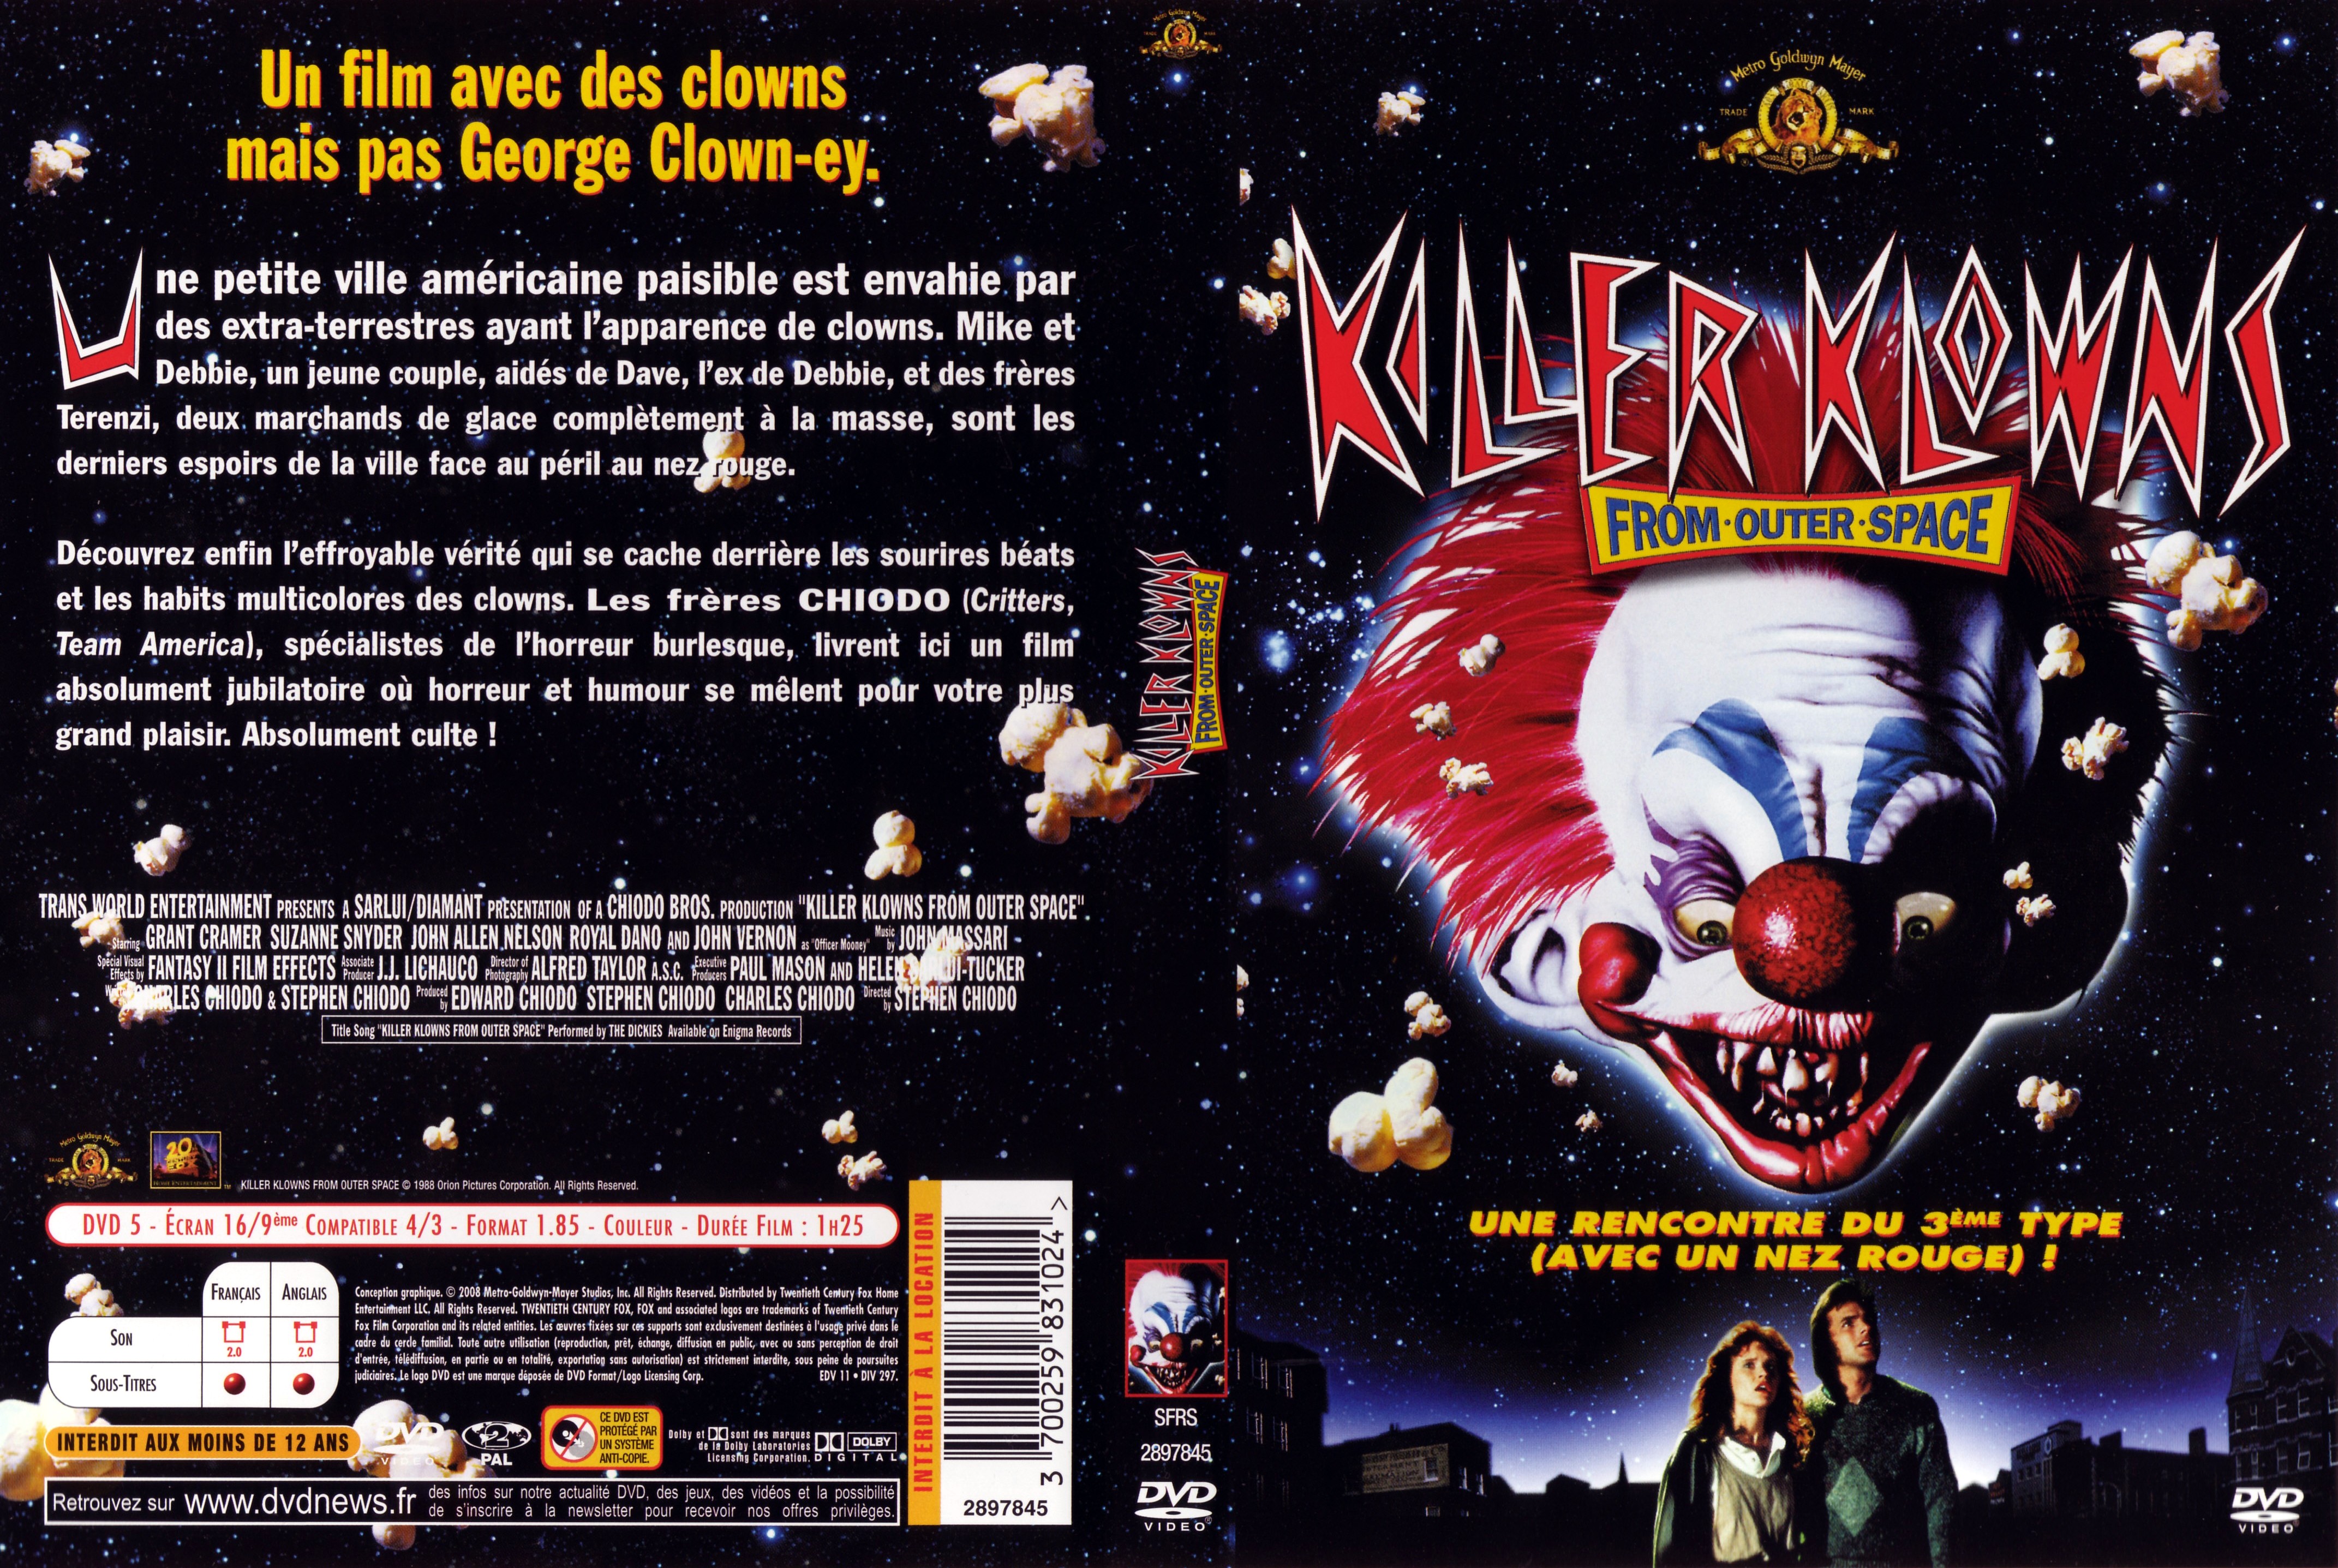 Jaquette DVD Killer klowns from outer space